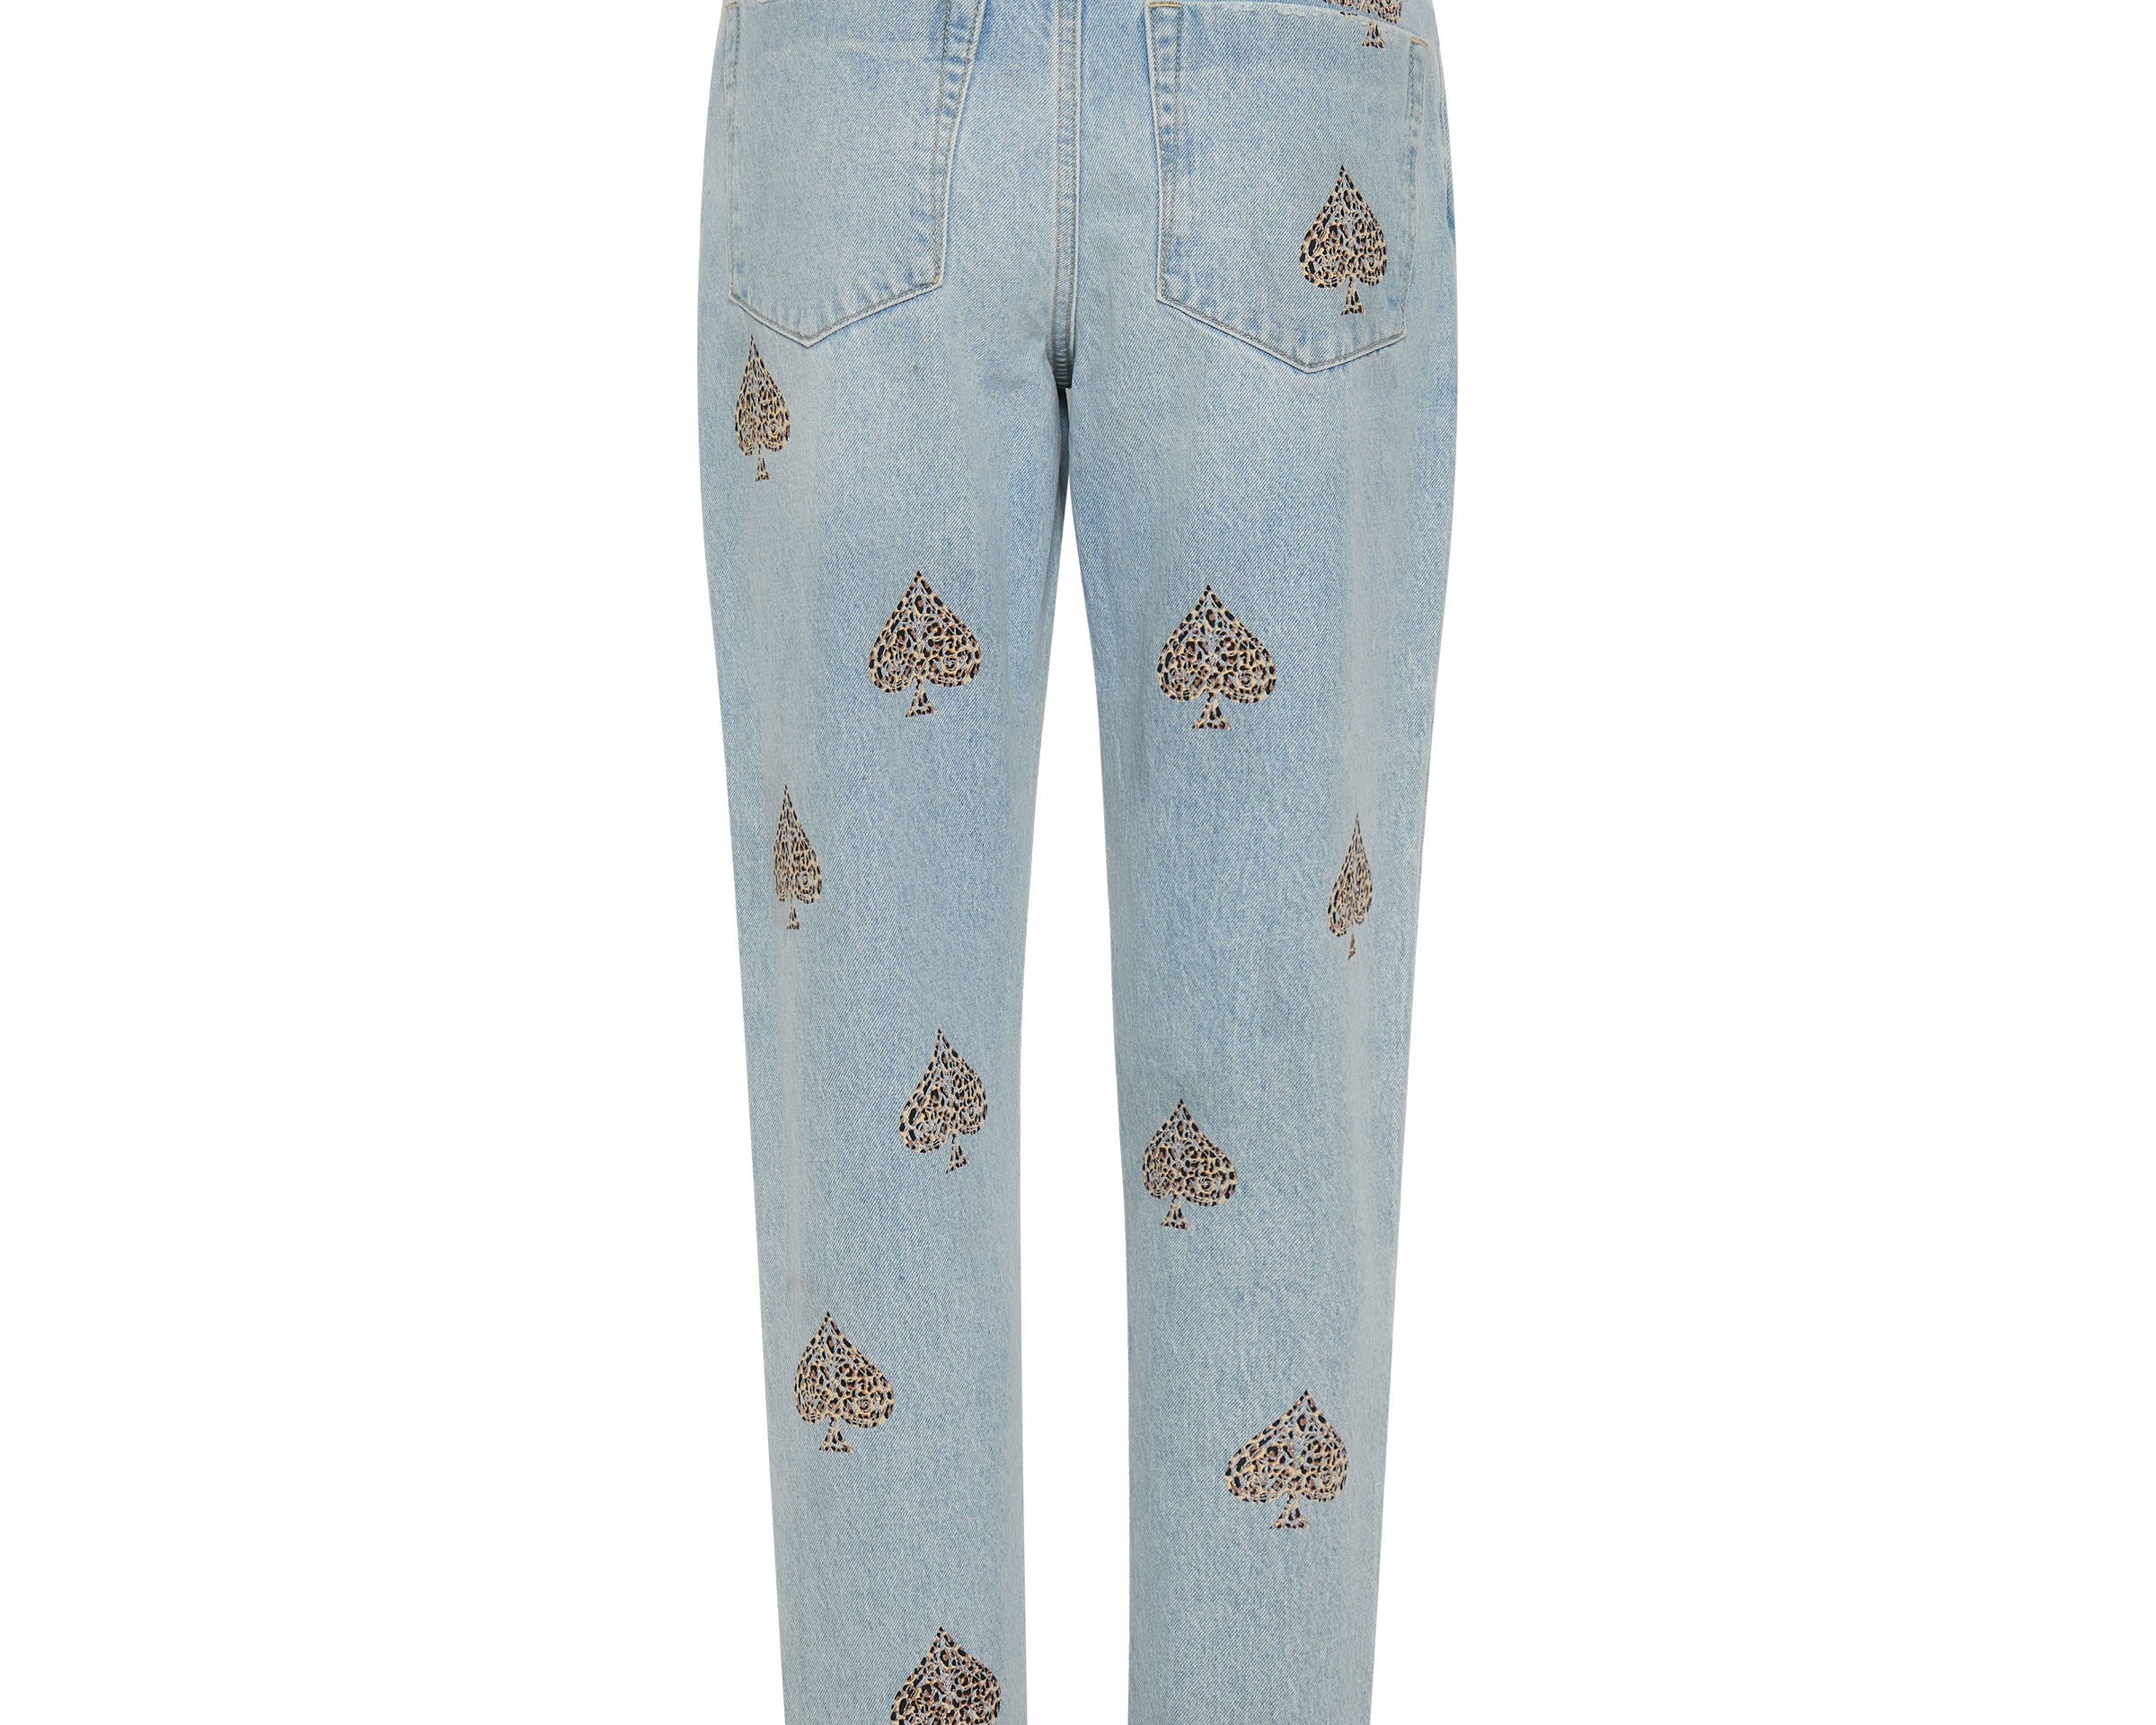 ACED LEGEND HIGH WAIST MOM FIT JEANS